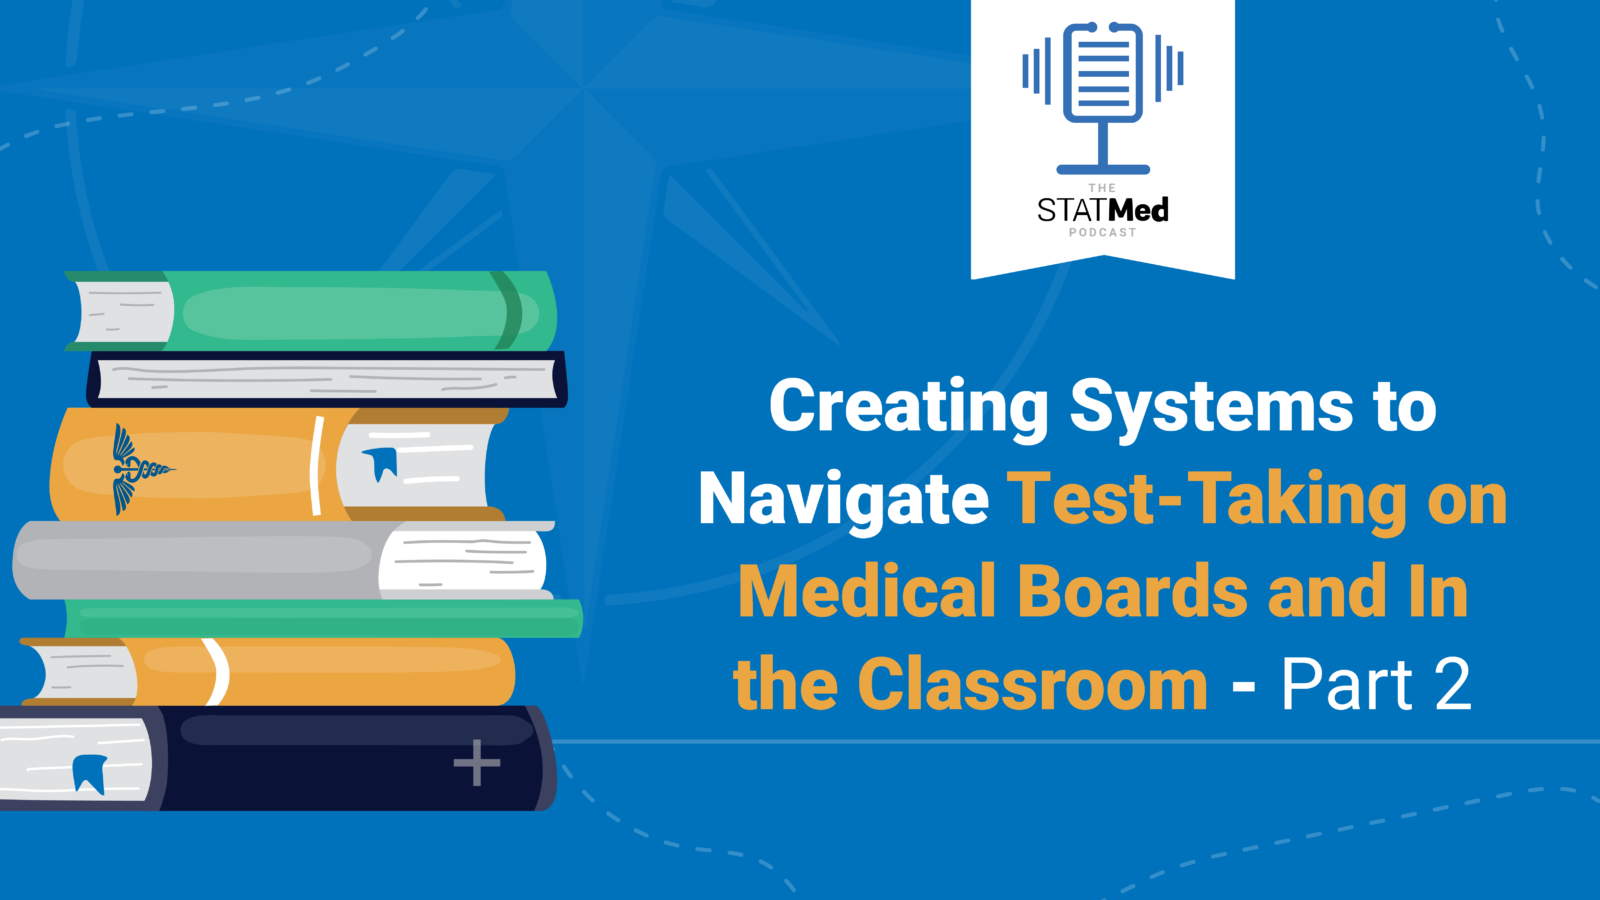 Stack of med school books with the text "Creating Systems to Navigate Test-Taking on Medical Boards and In the Classroom"